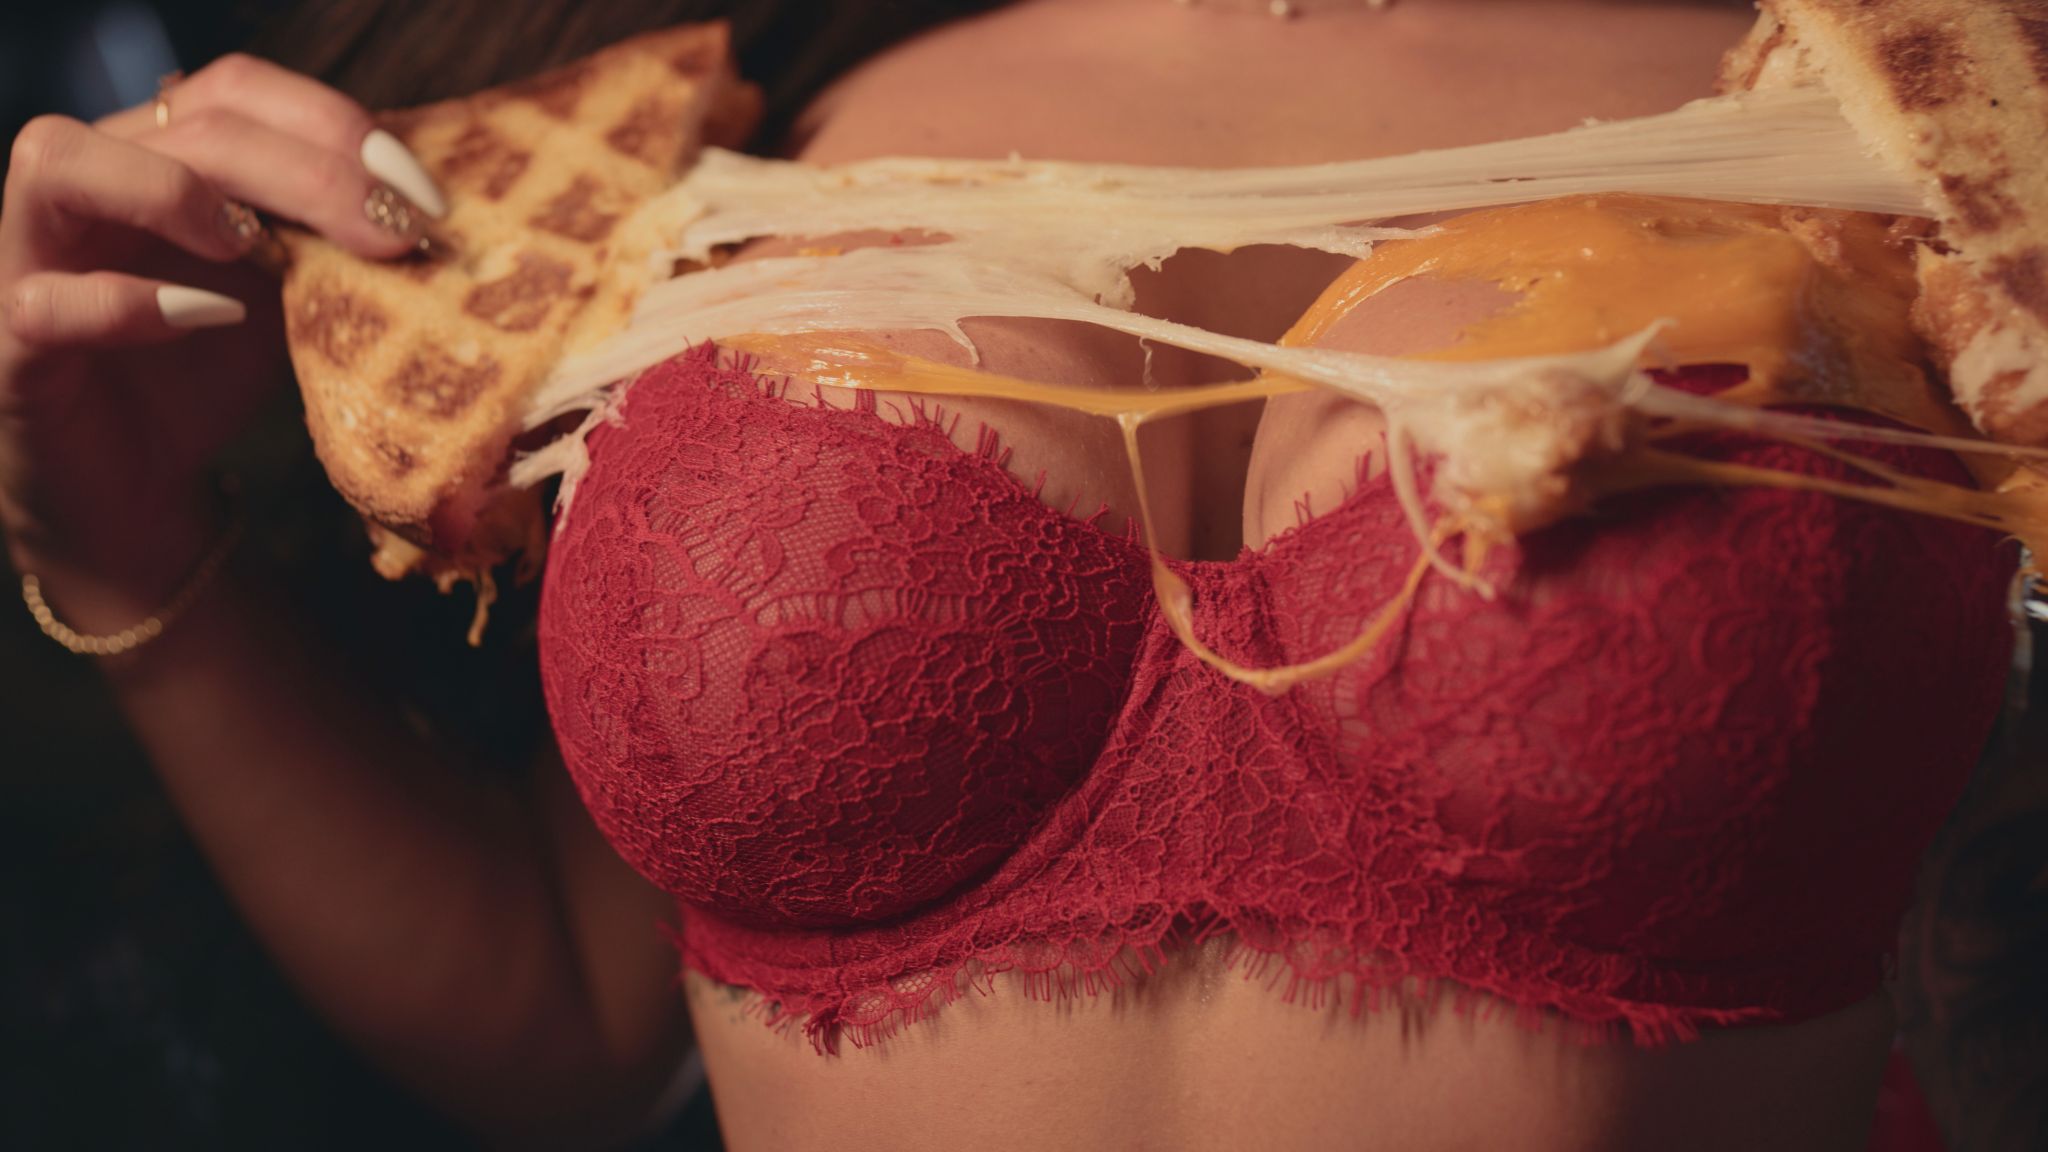 Closeup of grilled cheese sandwich being spread across a woman wearing a red lacy bra's chest